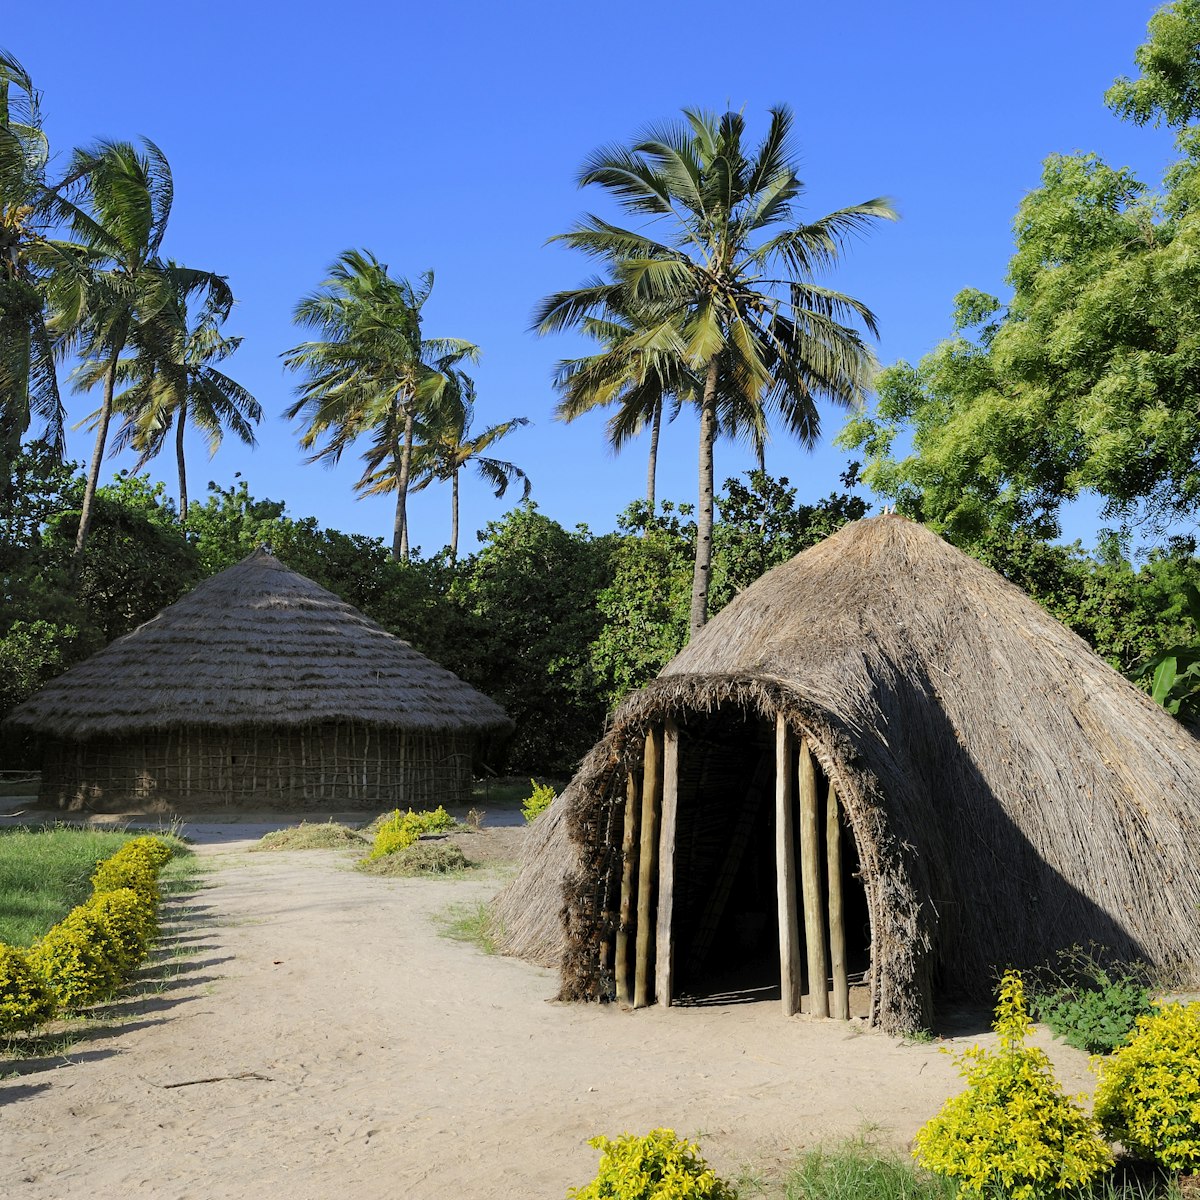 Tanzania, Dar es Salaam, the Village Museum is a series of authentic dwellings depicting the traditional lifestyle of various regions of the country